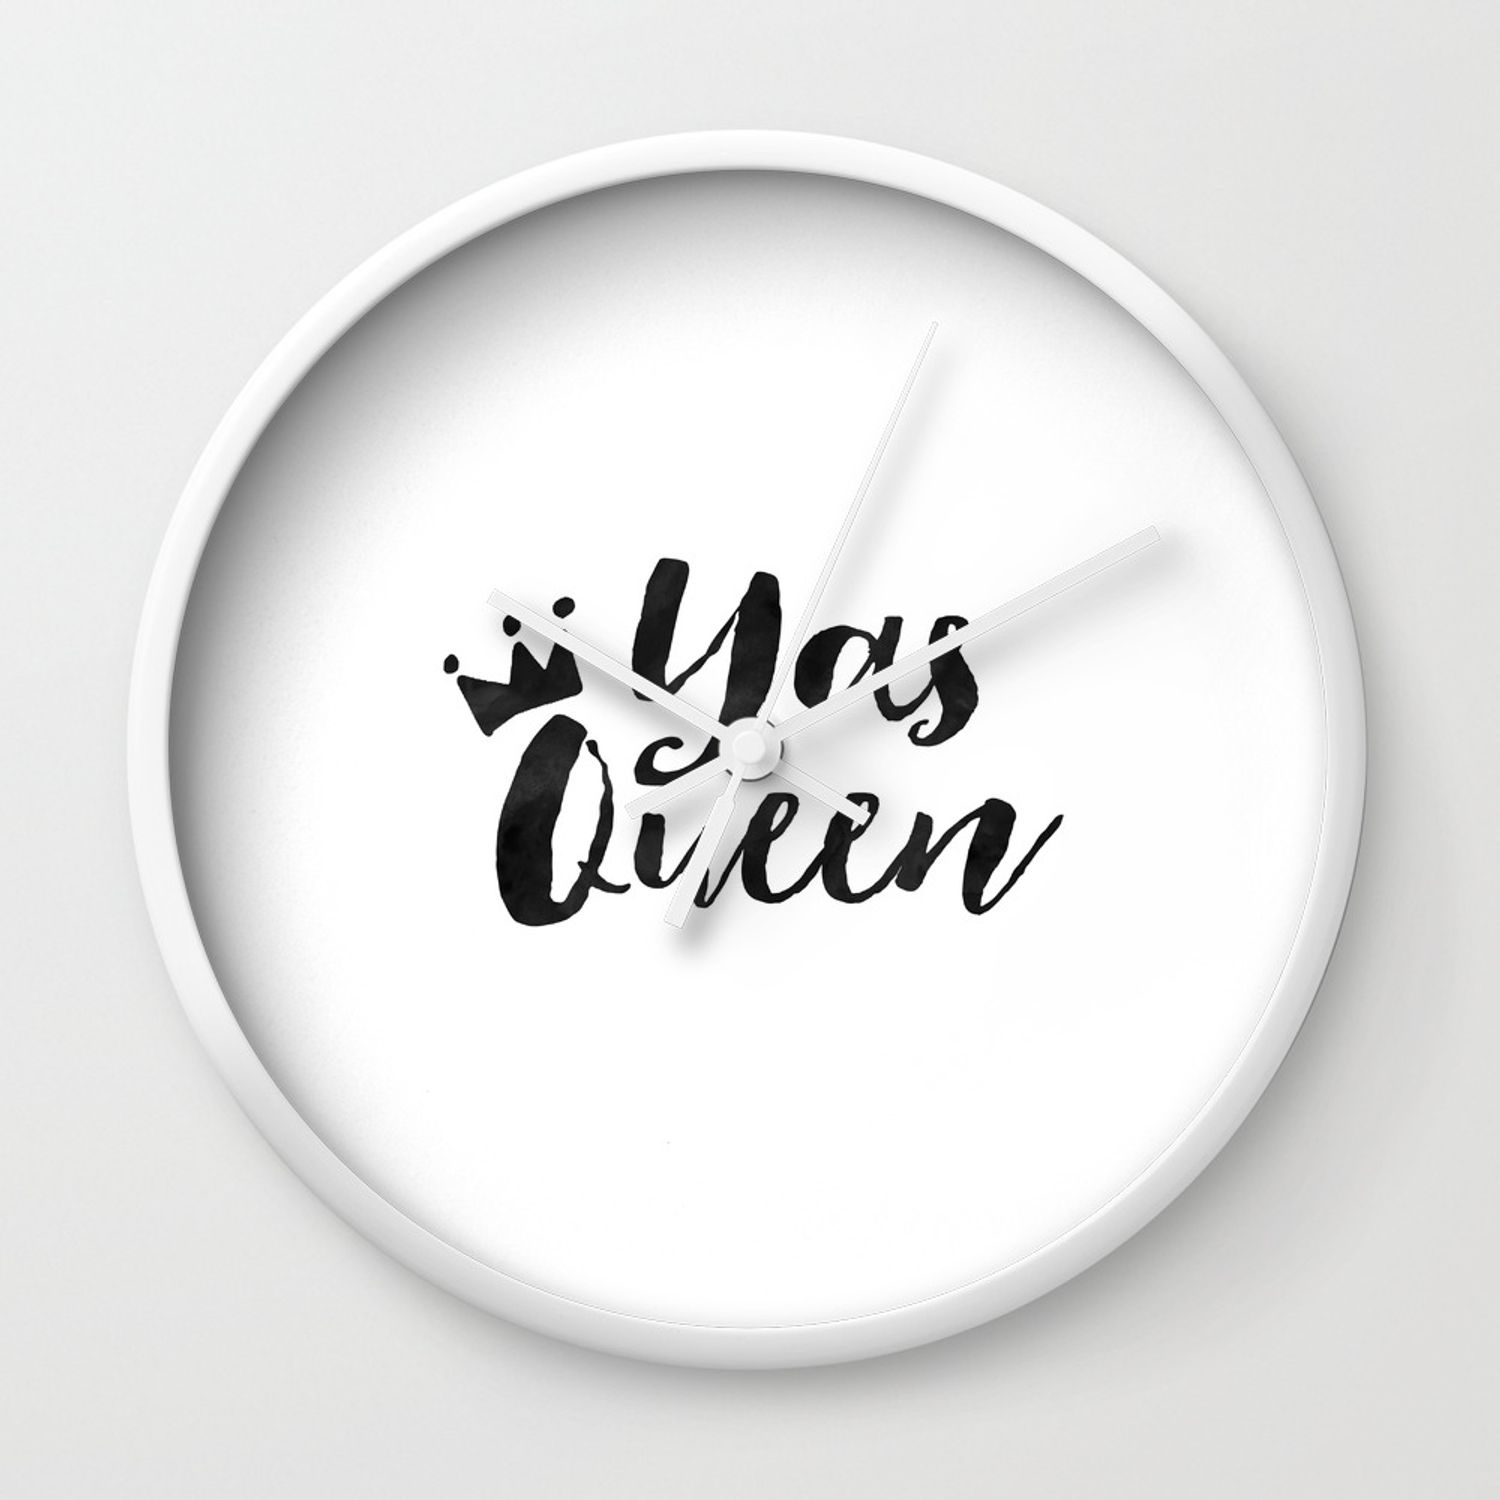 YAS QUEEN QUOTE, Girls Room Decor, Funny Print, Yas Kween Quote, Girly Print, Girl Boss, Like A Boss, Quot Wall Clock